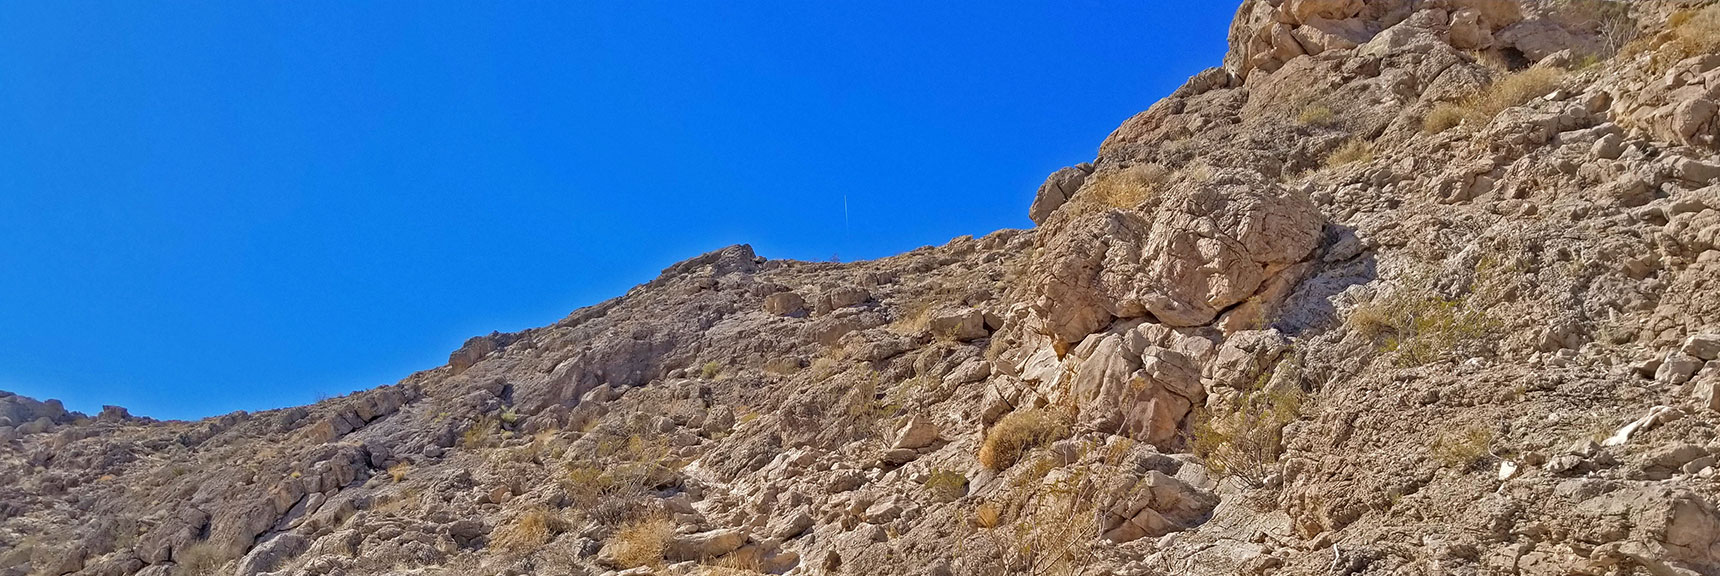 Much Weaving Around Rocks and Cliffs, But Route Remains Class 2 Ascent | Lone Mountain | Las Vegas, Nevada